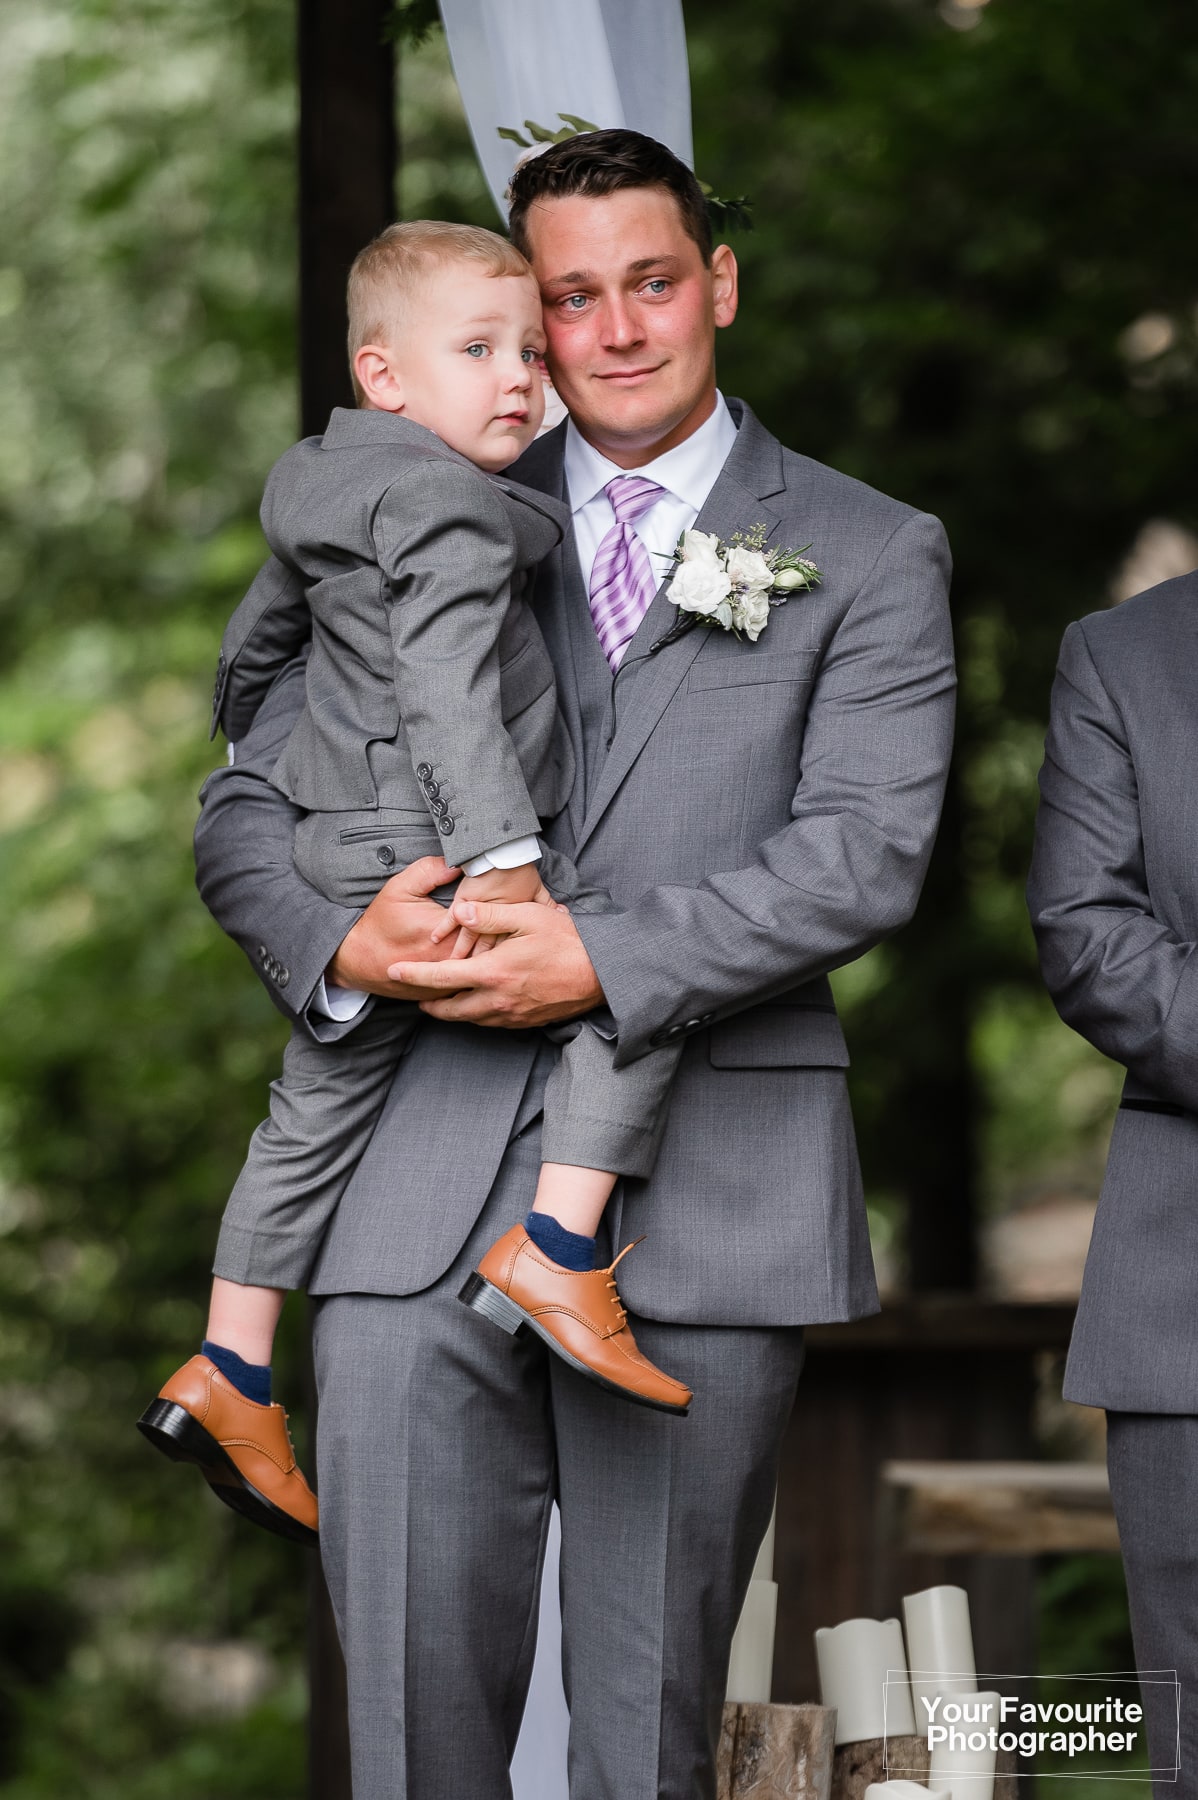 Groom and son waiting for bride